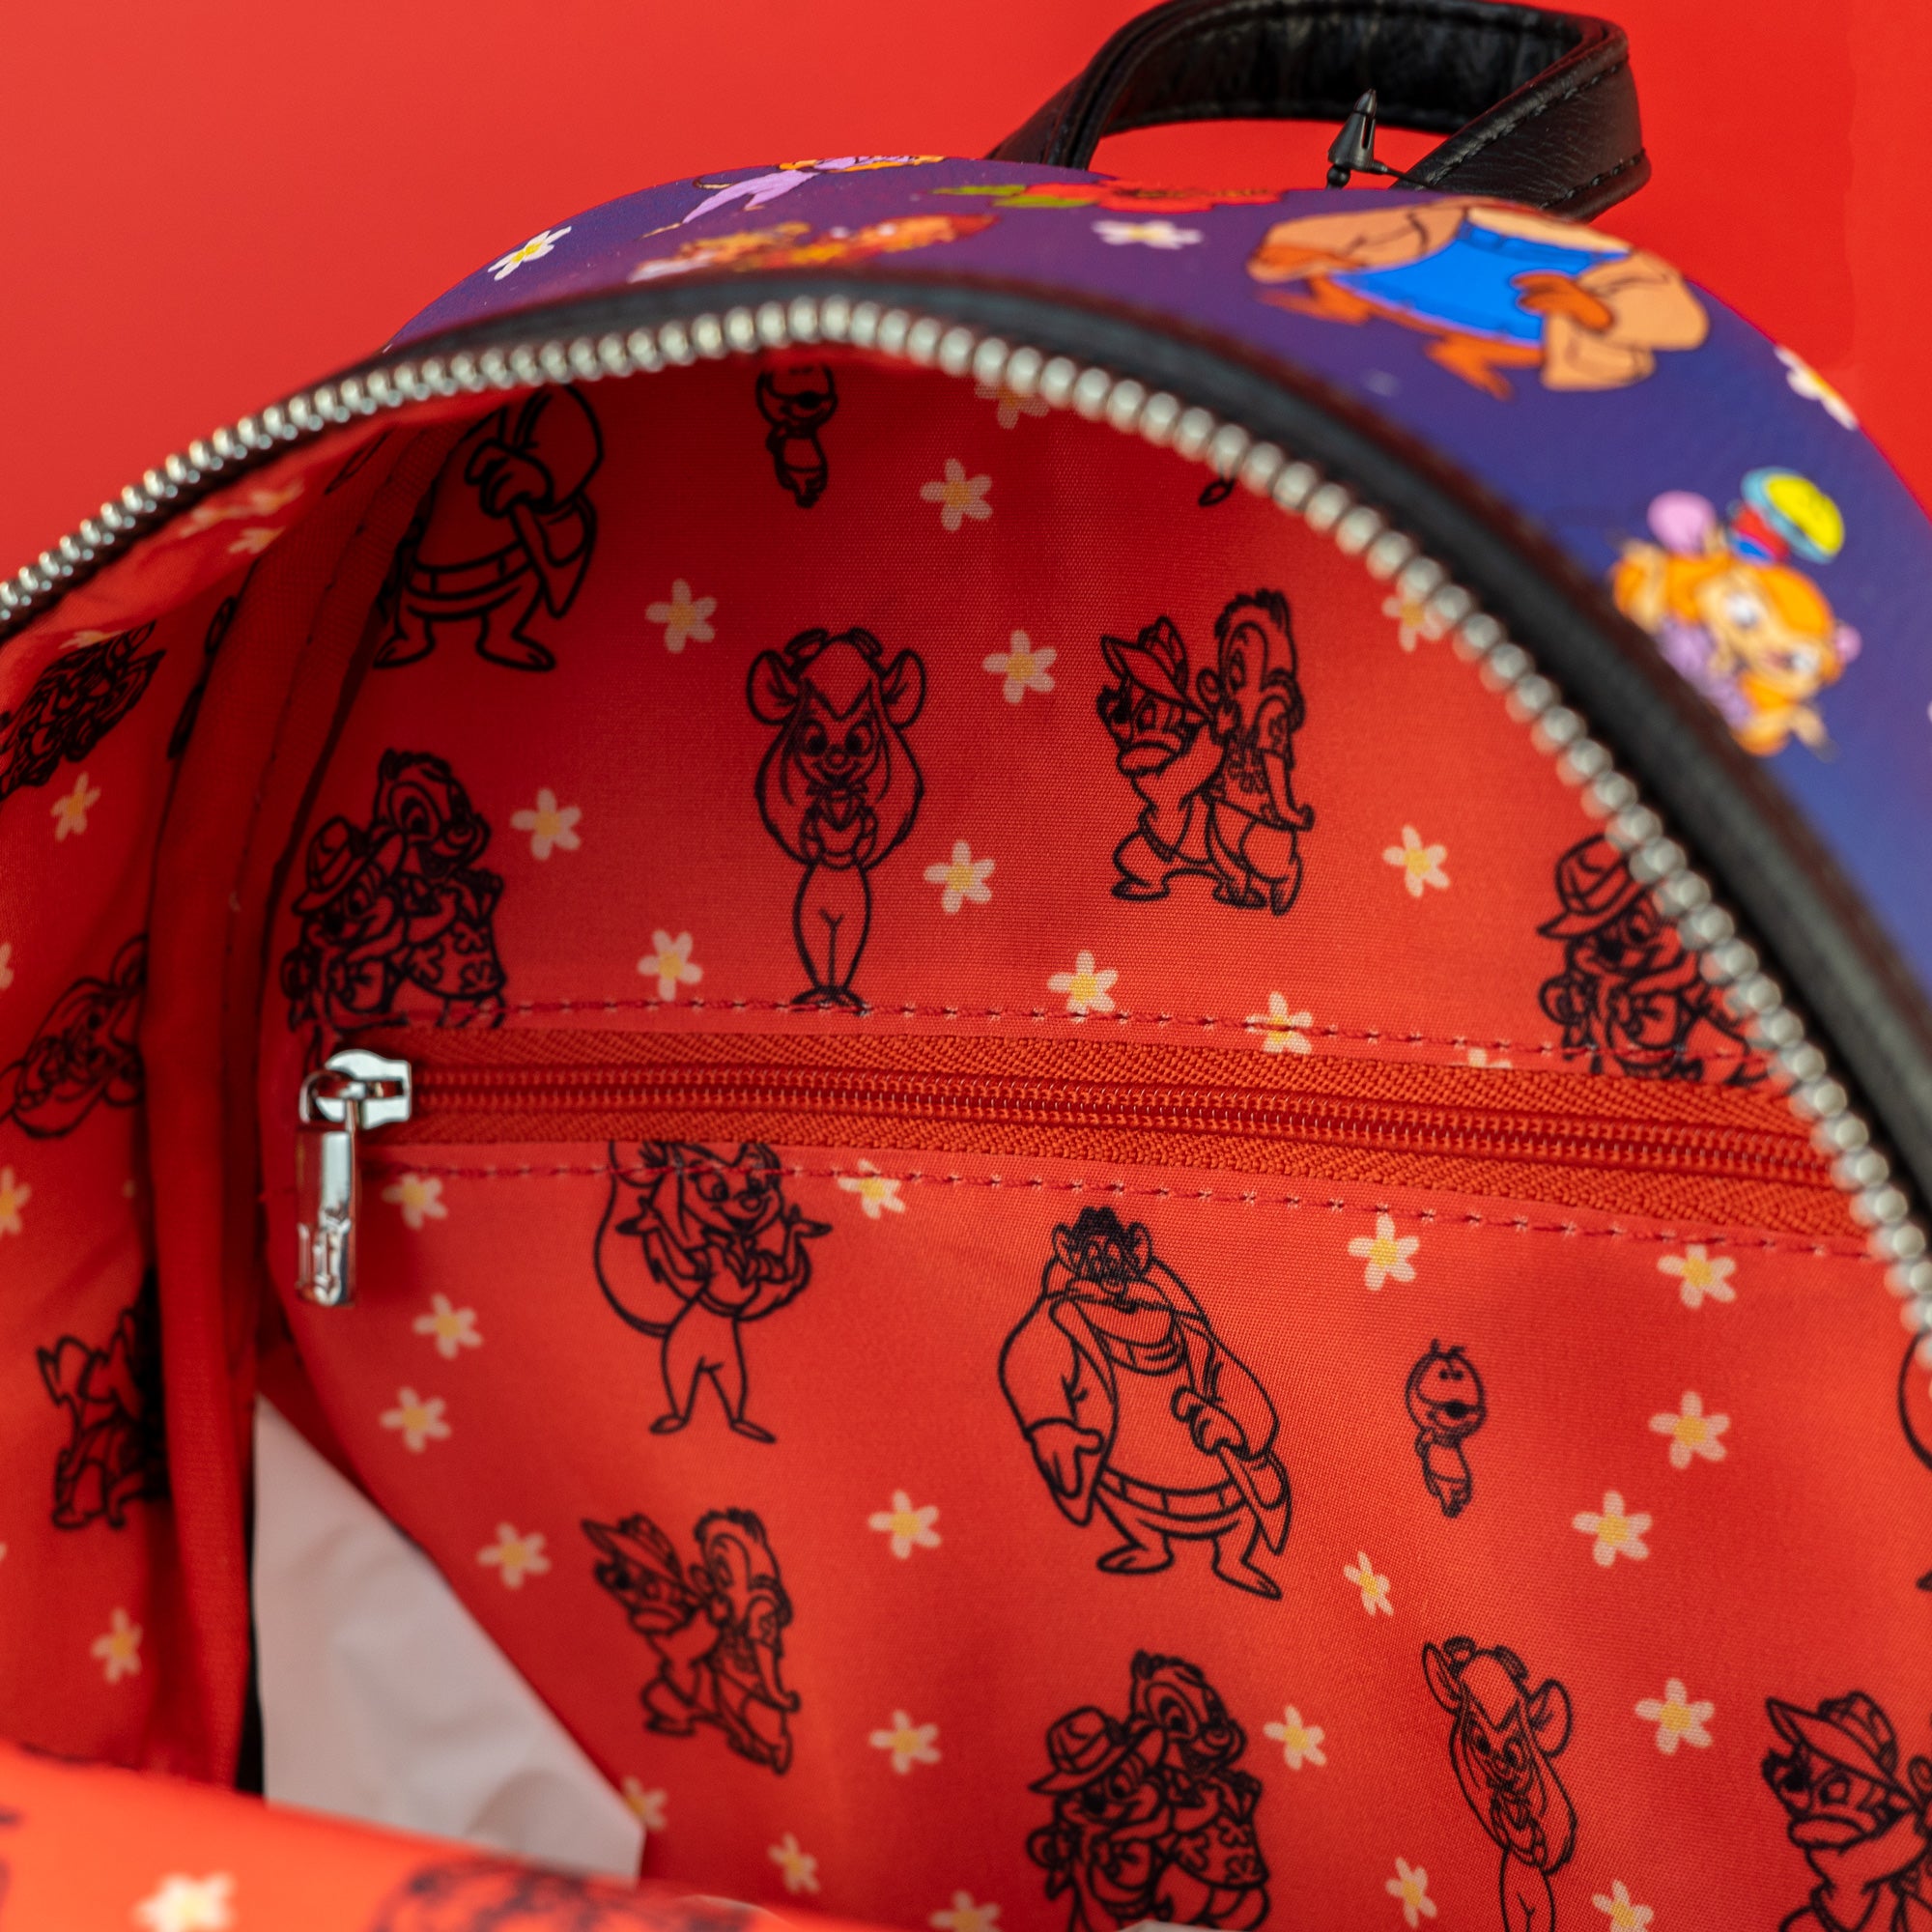 Loungefly x Disney Chip 'n Dale Rescue Rangers AOP Mini Backpack